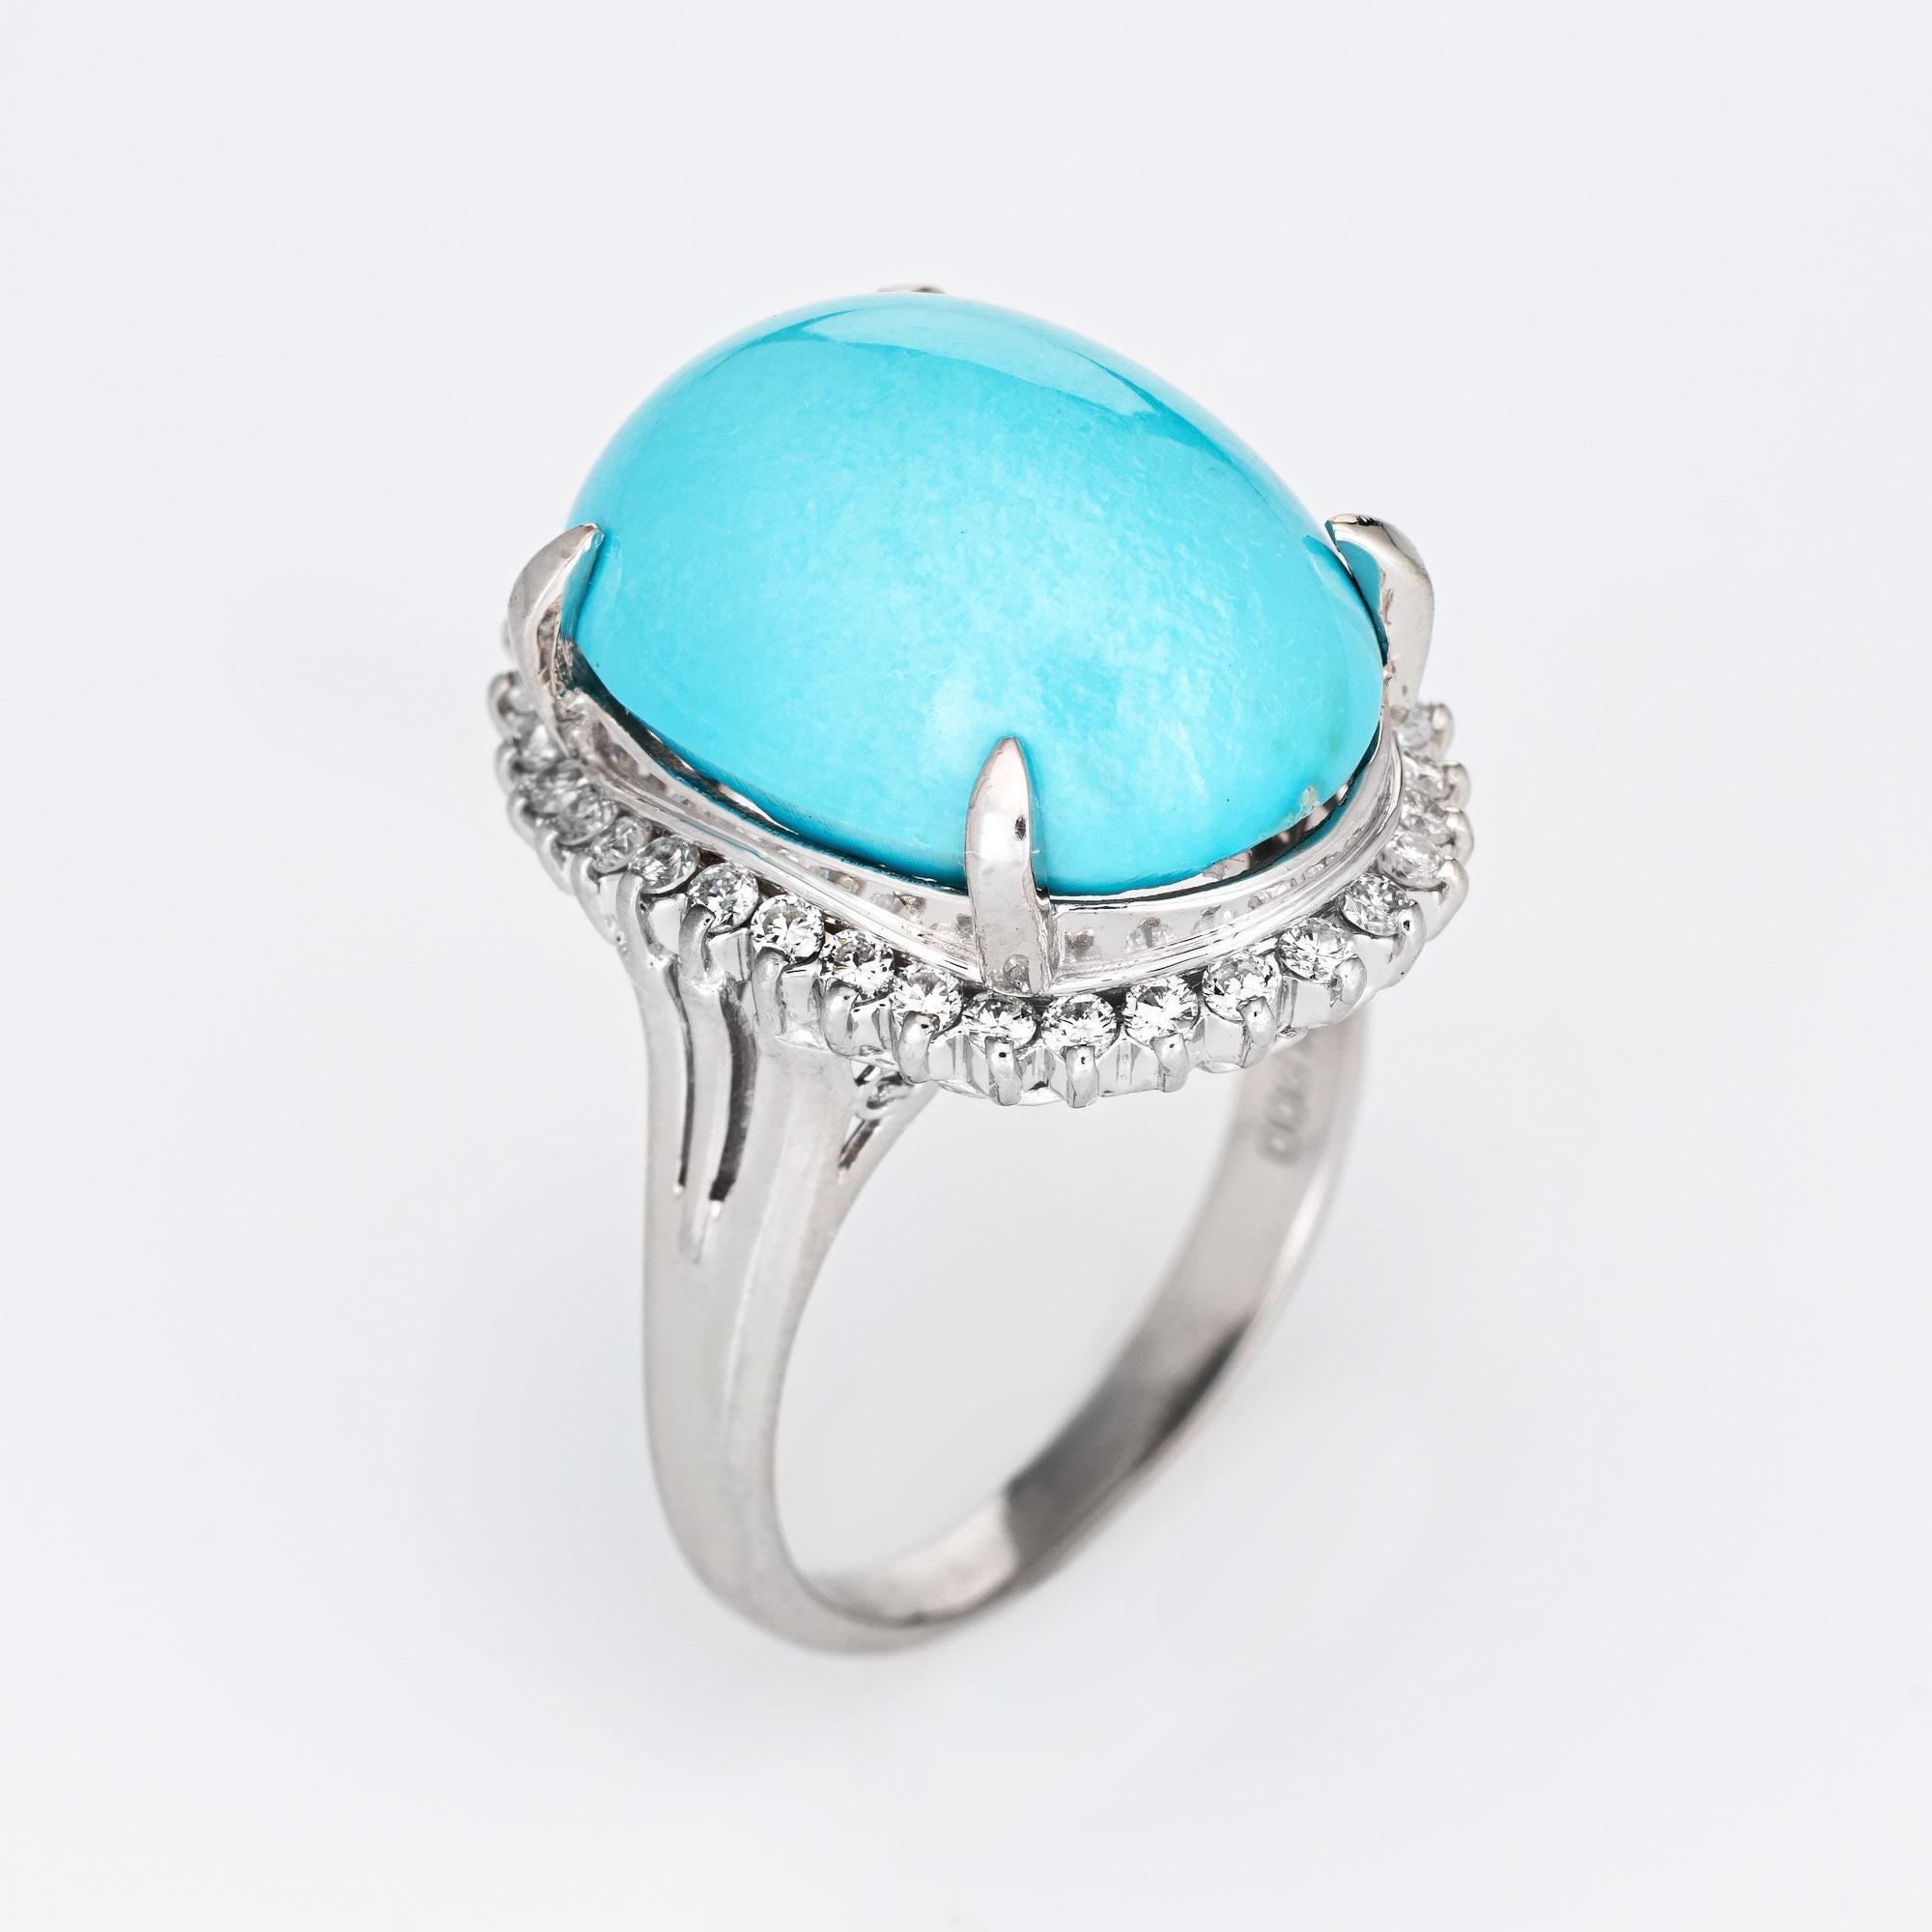 Stylish egg shell blue turquoise & diamond cocktail ring crafted in 900 platinum. 

Turquoise cabochon measures 18mm x 13mm (estimated at 15 carats) is accented with an estimated 0.42 carats (estimated at H-I color and VS2-SI1 clarity). The